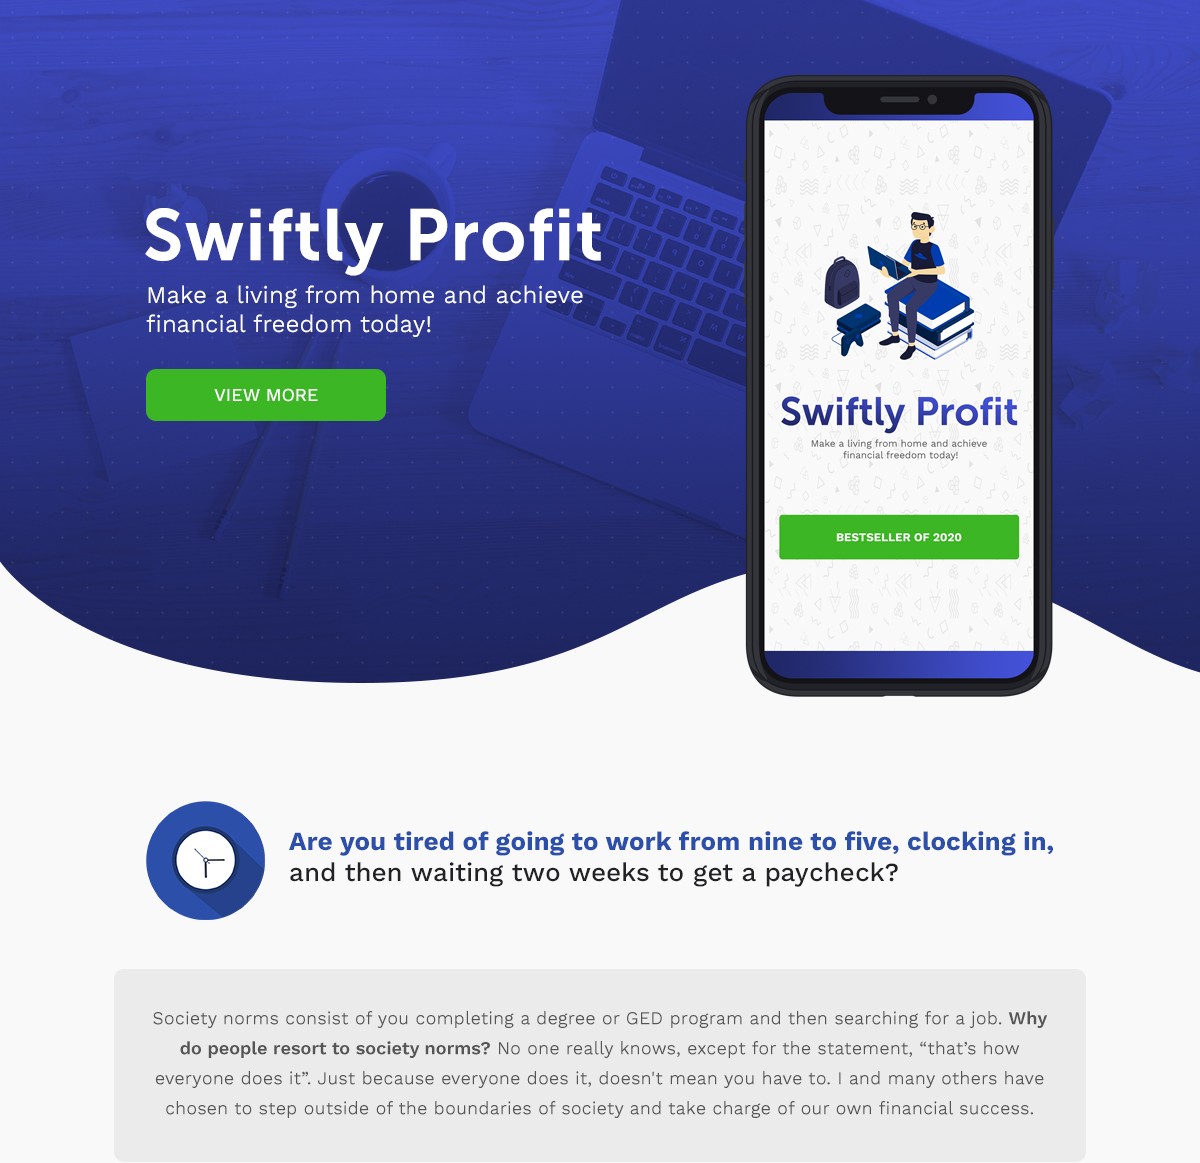 [SUPER HOT SHARE] Swiftly Profit Method Download